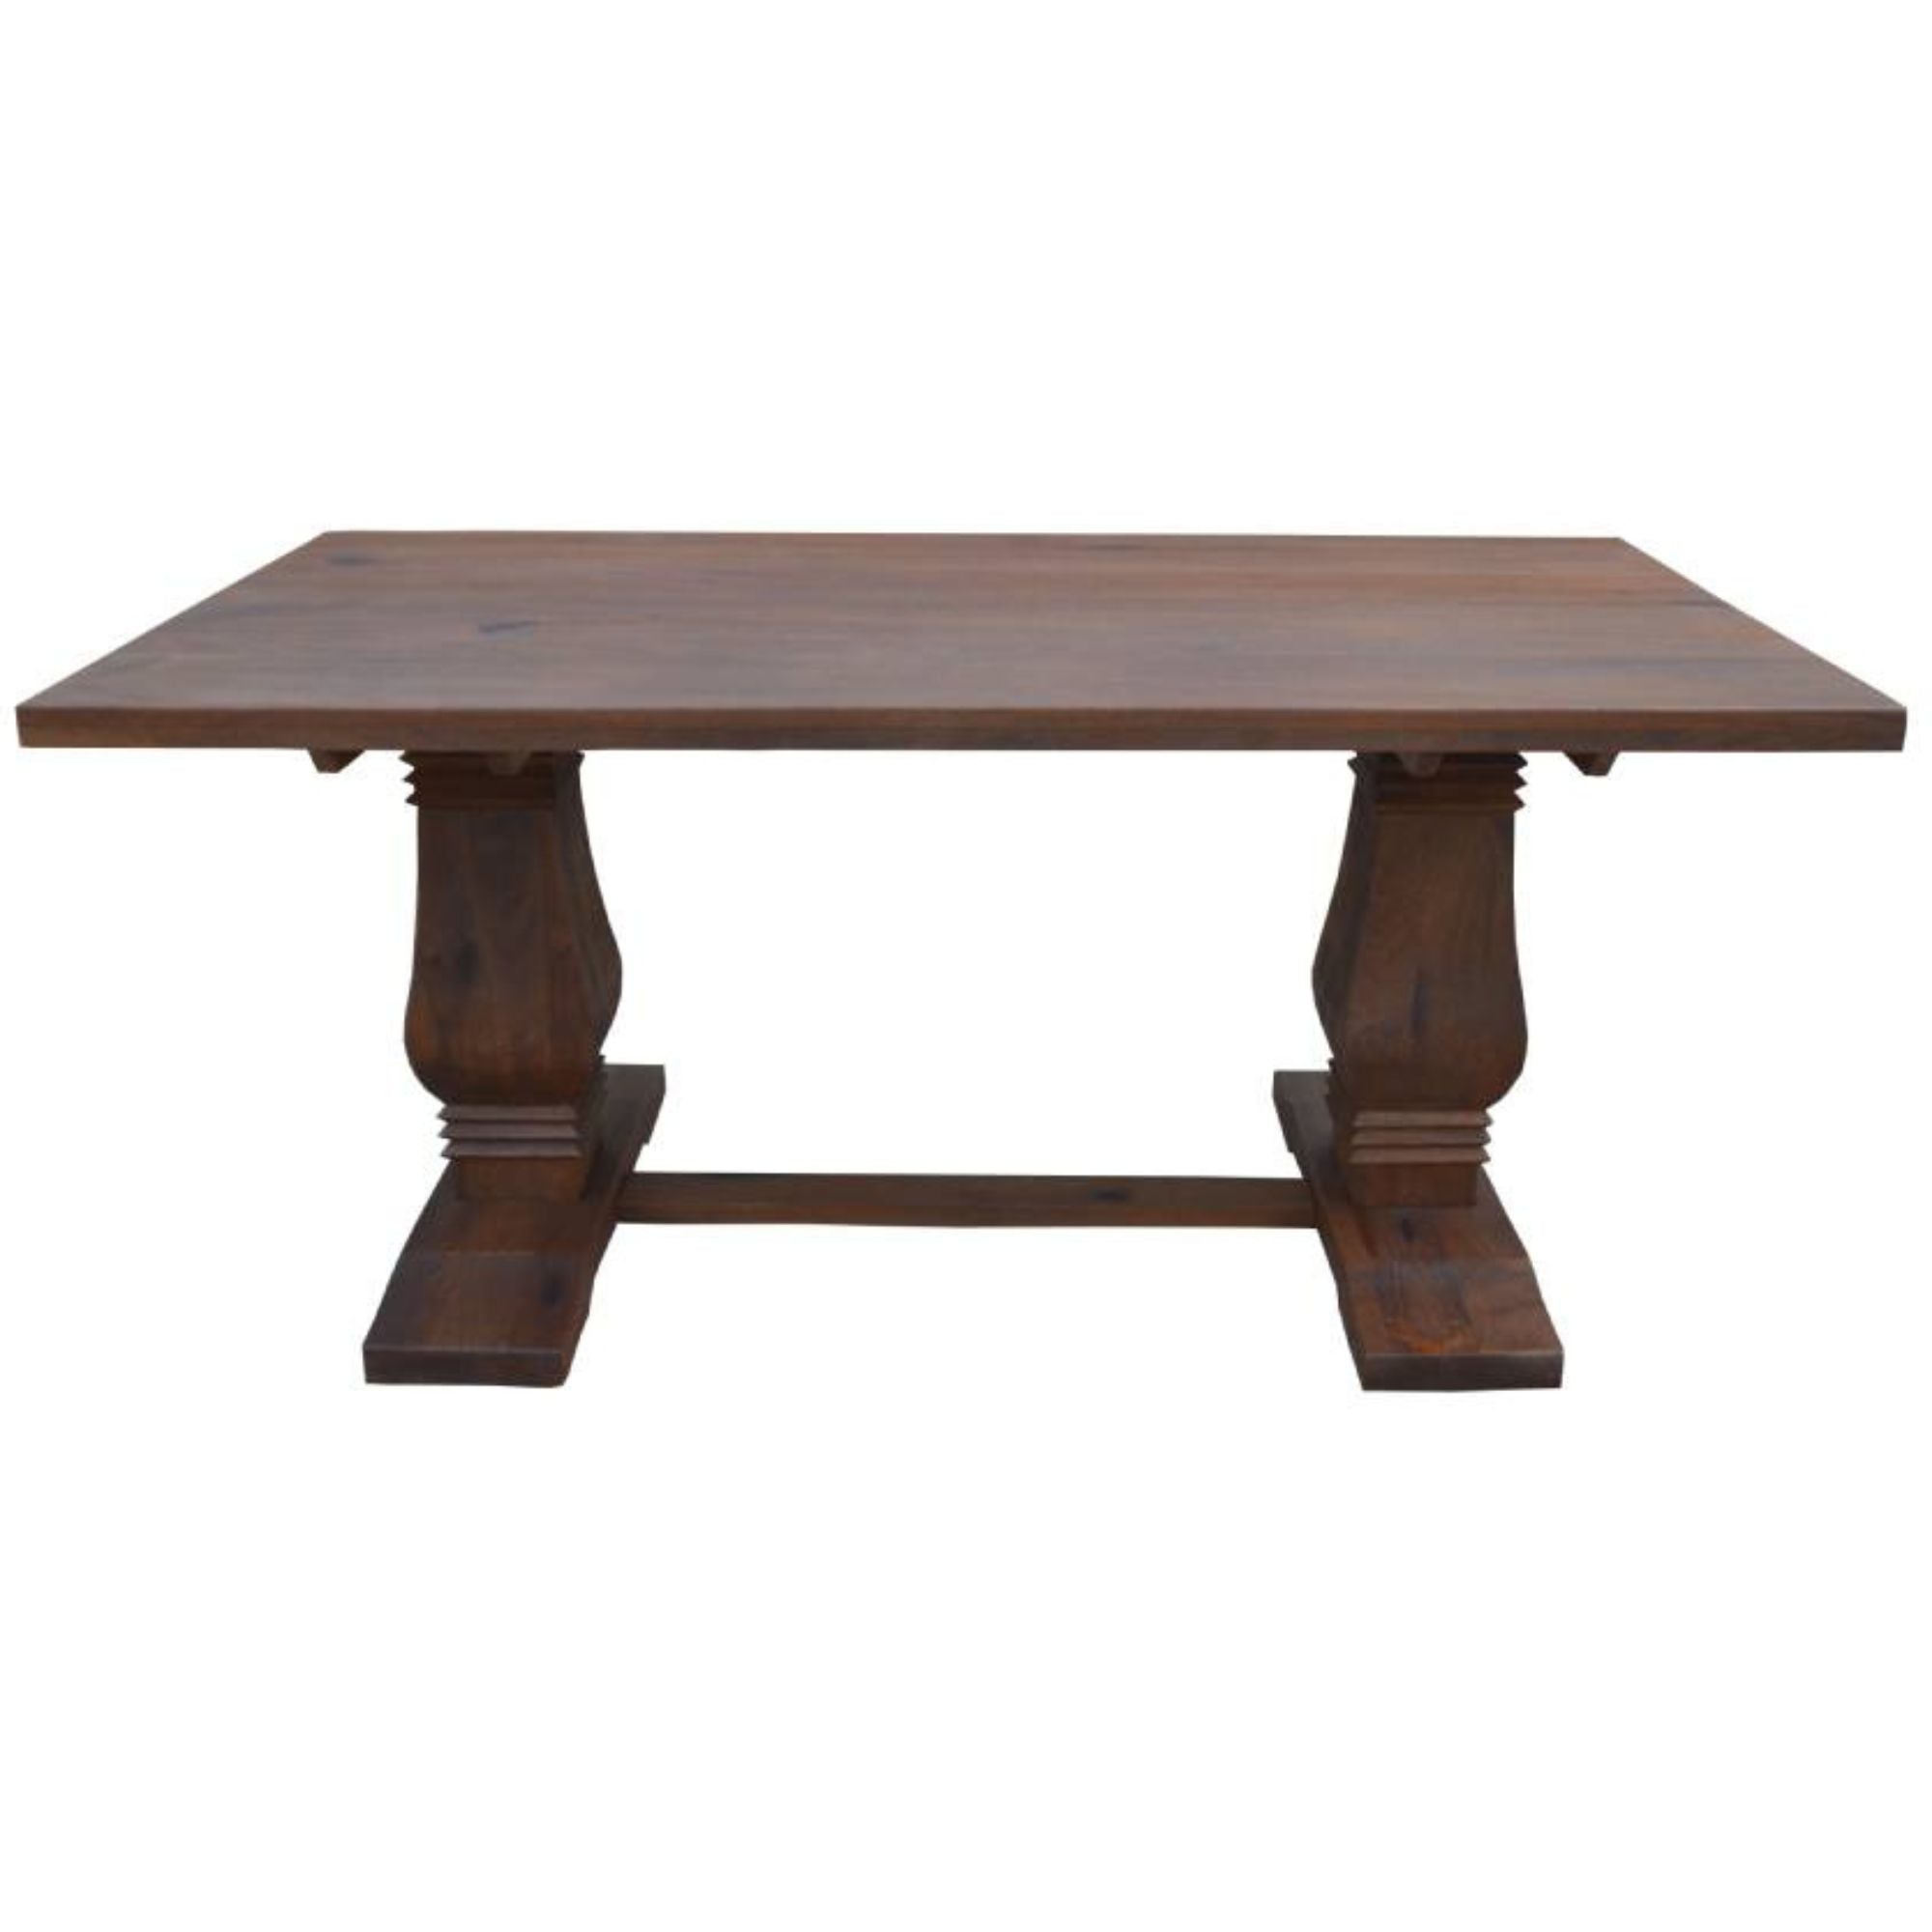 florence-high-dining-table-200cm-french-provincial-pedestal-solid-timber-wood